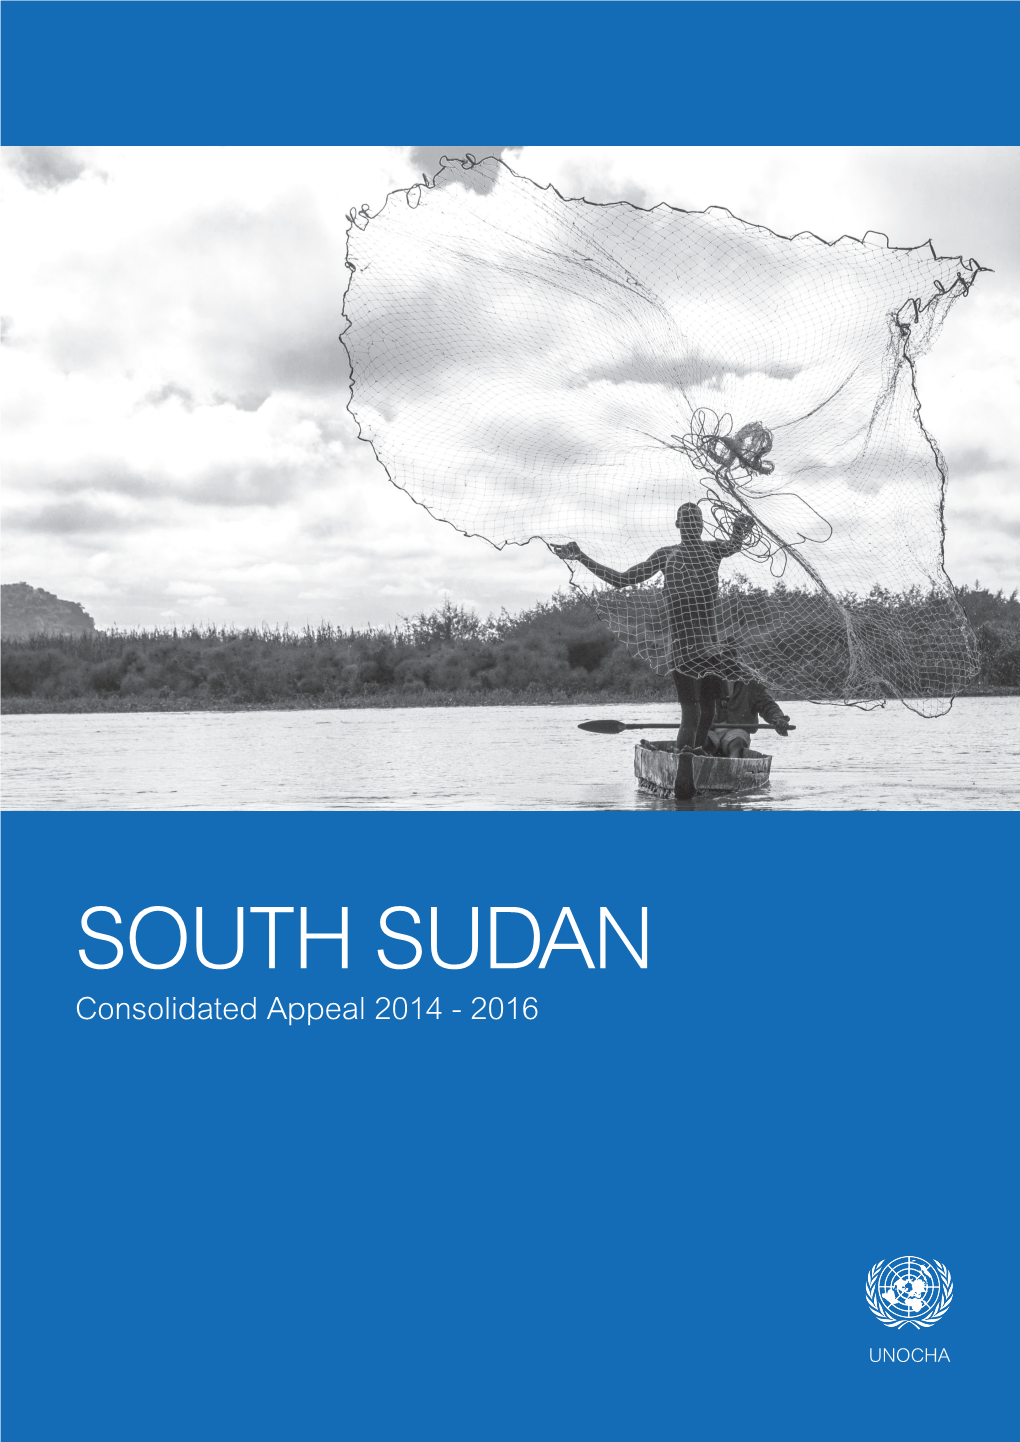 SOUTH SUDAN Consolidated Appeal 2014 - 2016